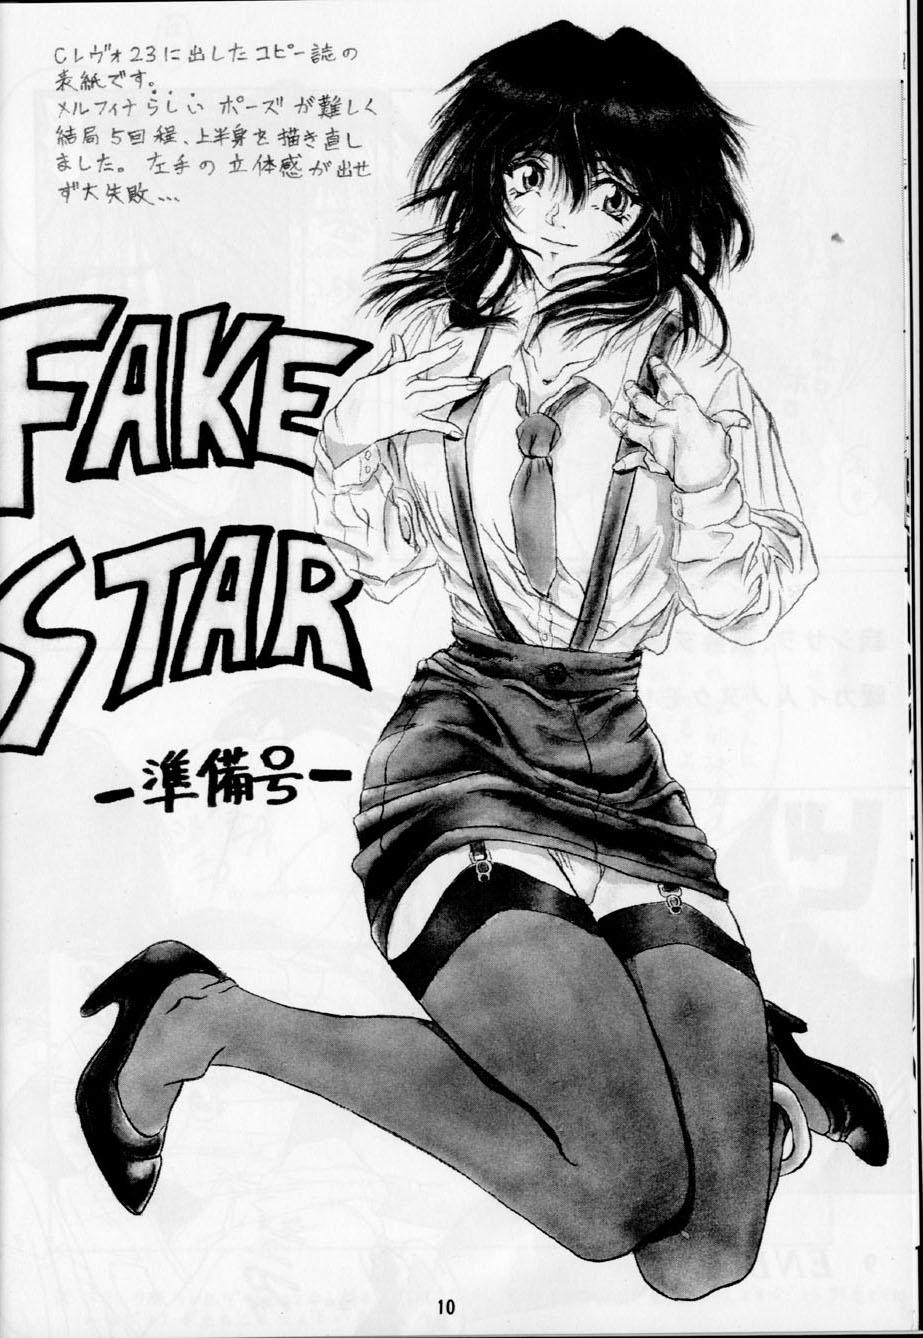 Teenager Fake Star - Outlaw star Hard Core Porn - Page 9